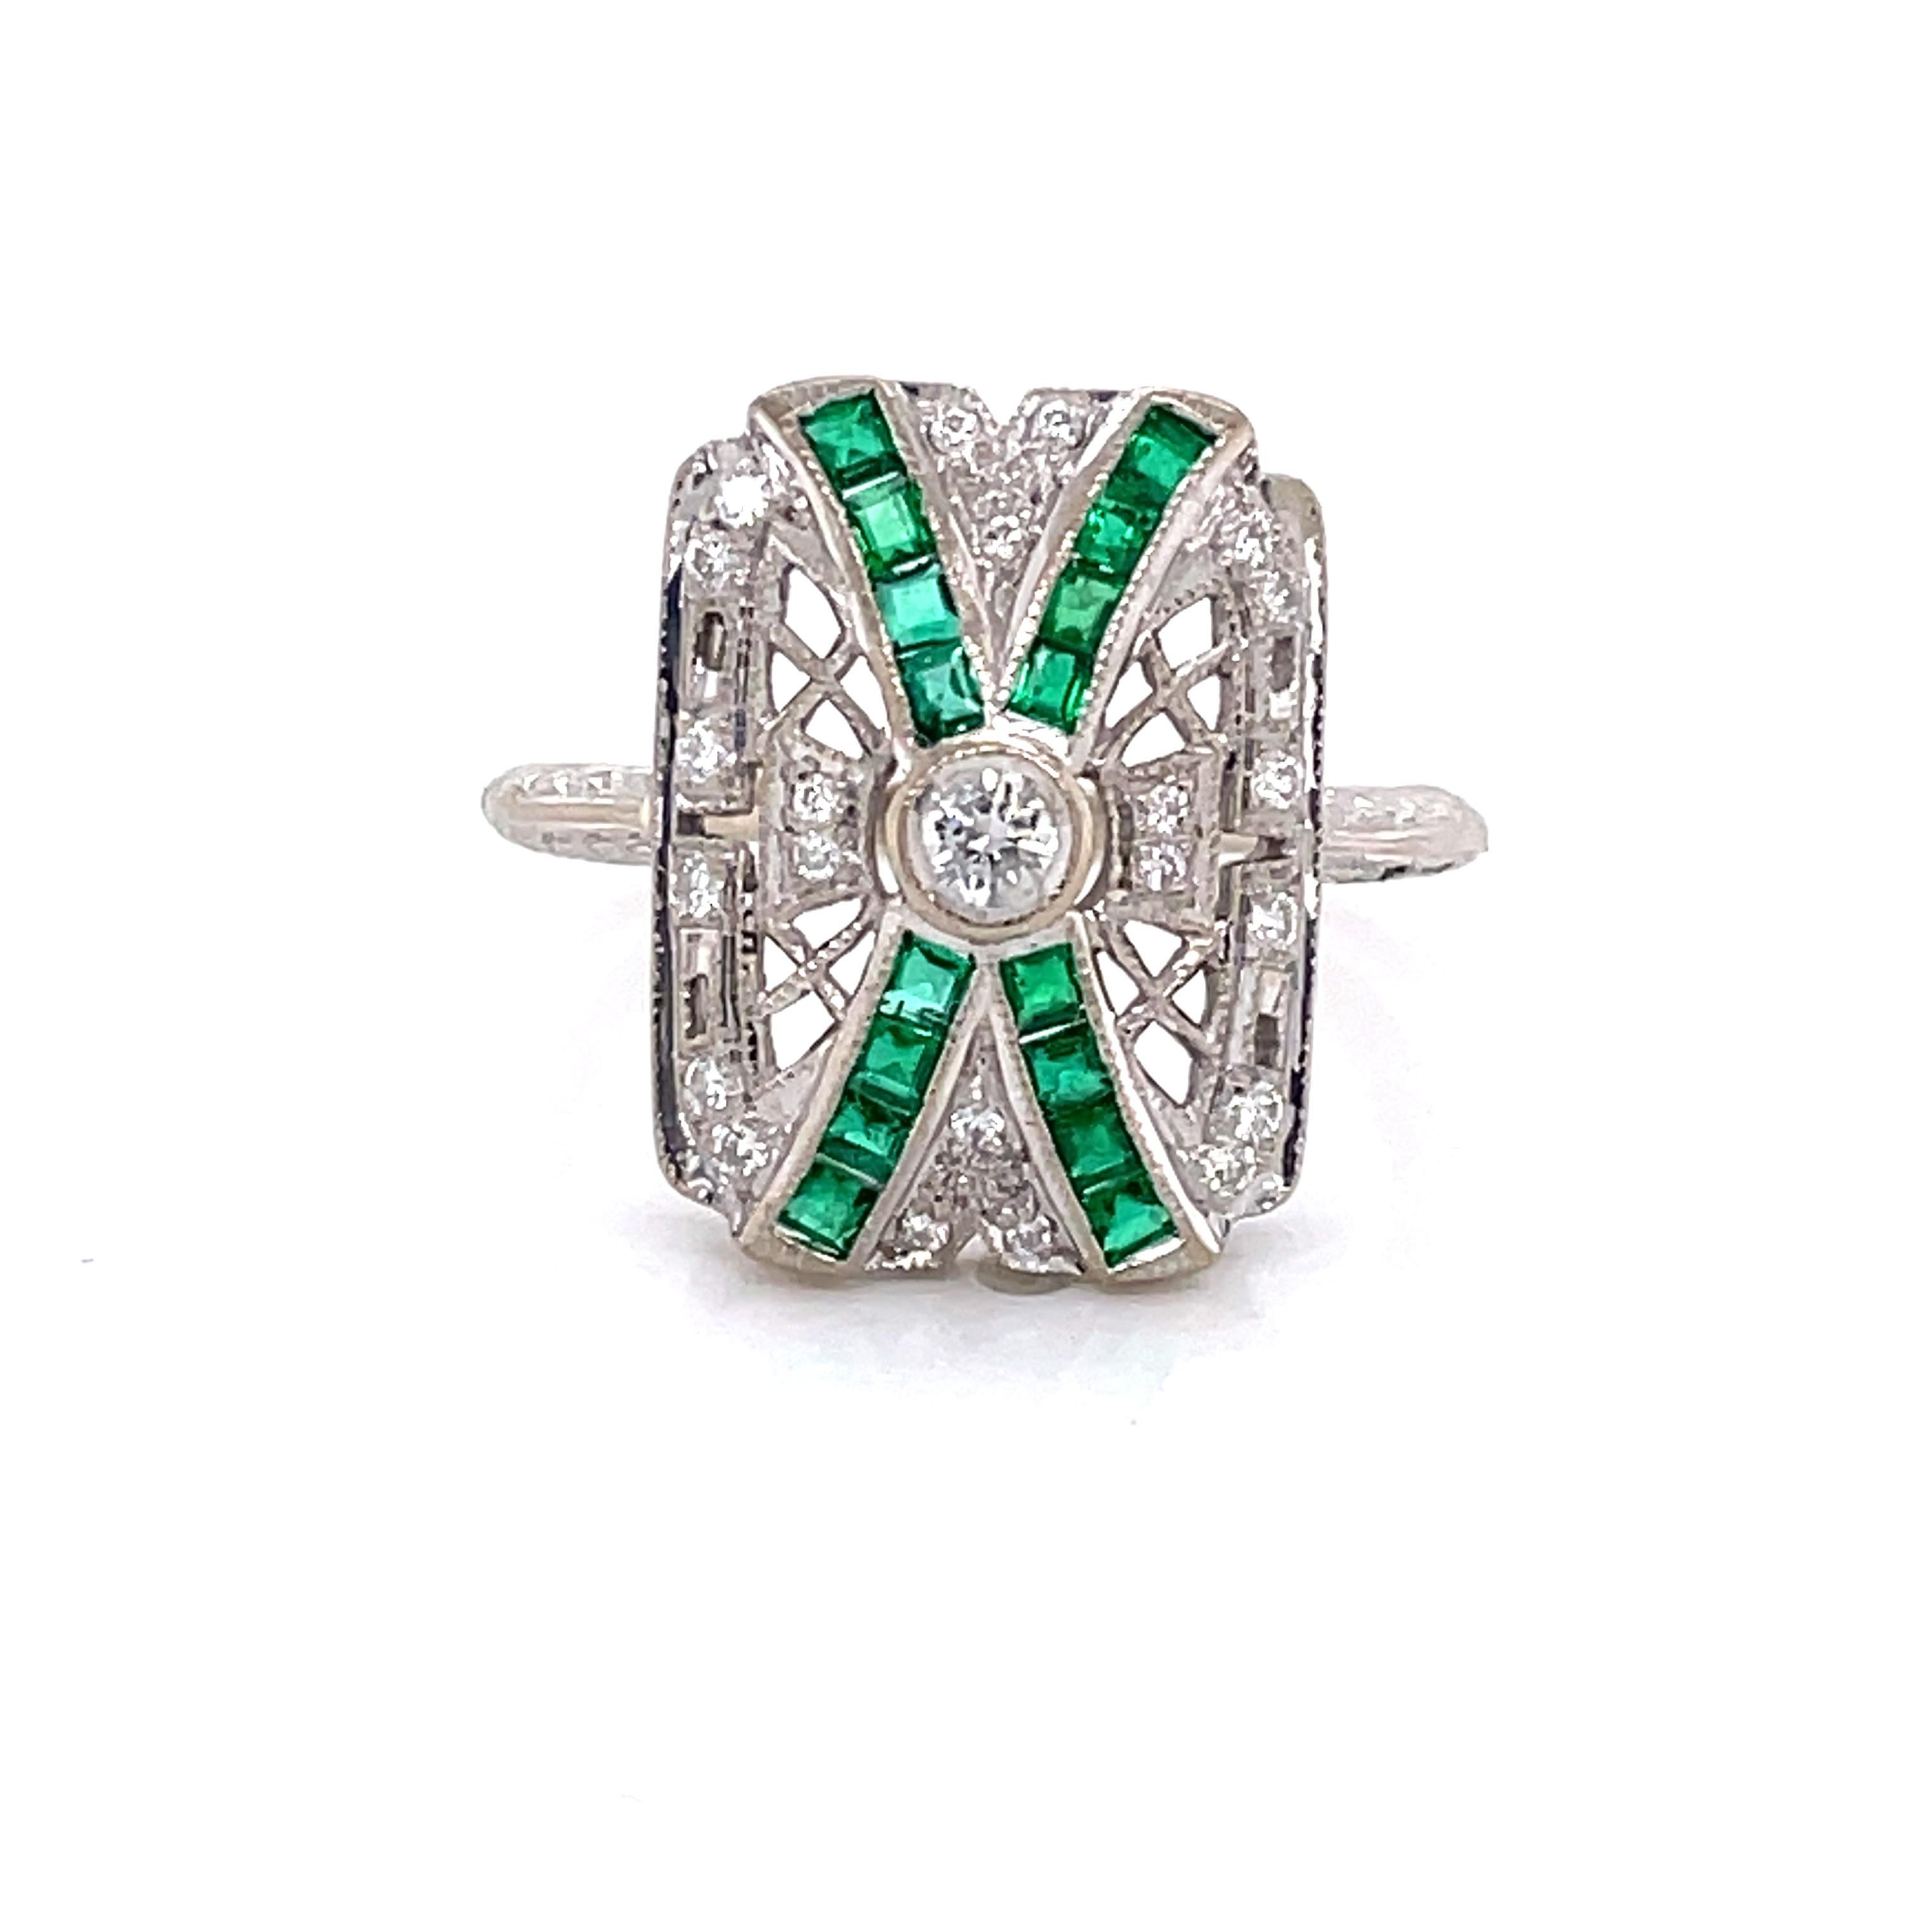 Vibrant emerald ribbons cross atop of the diamond covered eighteen karat 18K white gold filigree head of this stunning Art Deco style ring making it a great choice for antique style lovers or as a unique engagement ring. A round full cut .10 carat